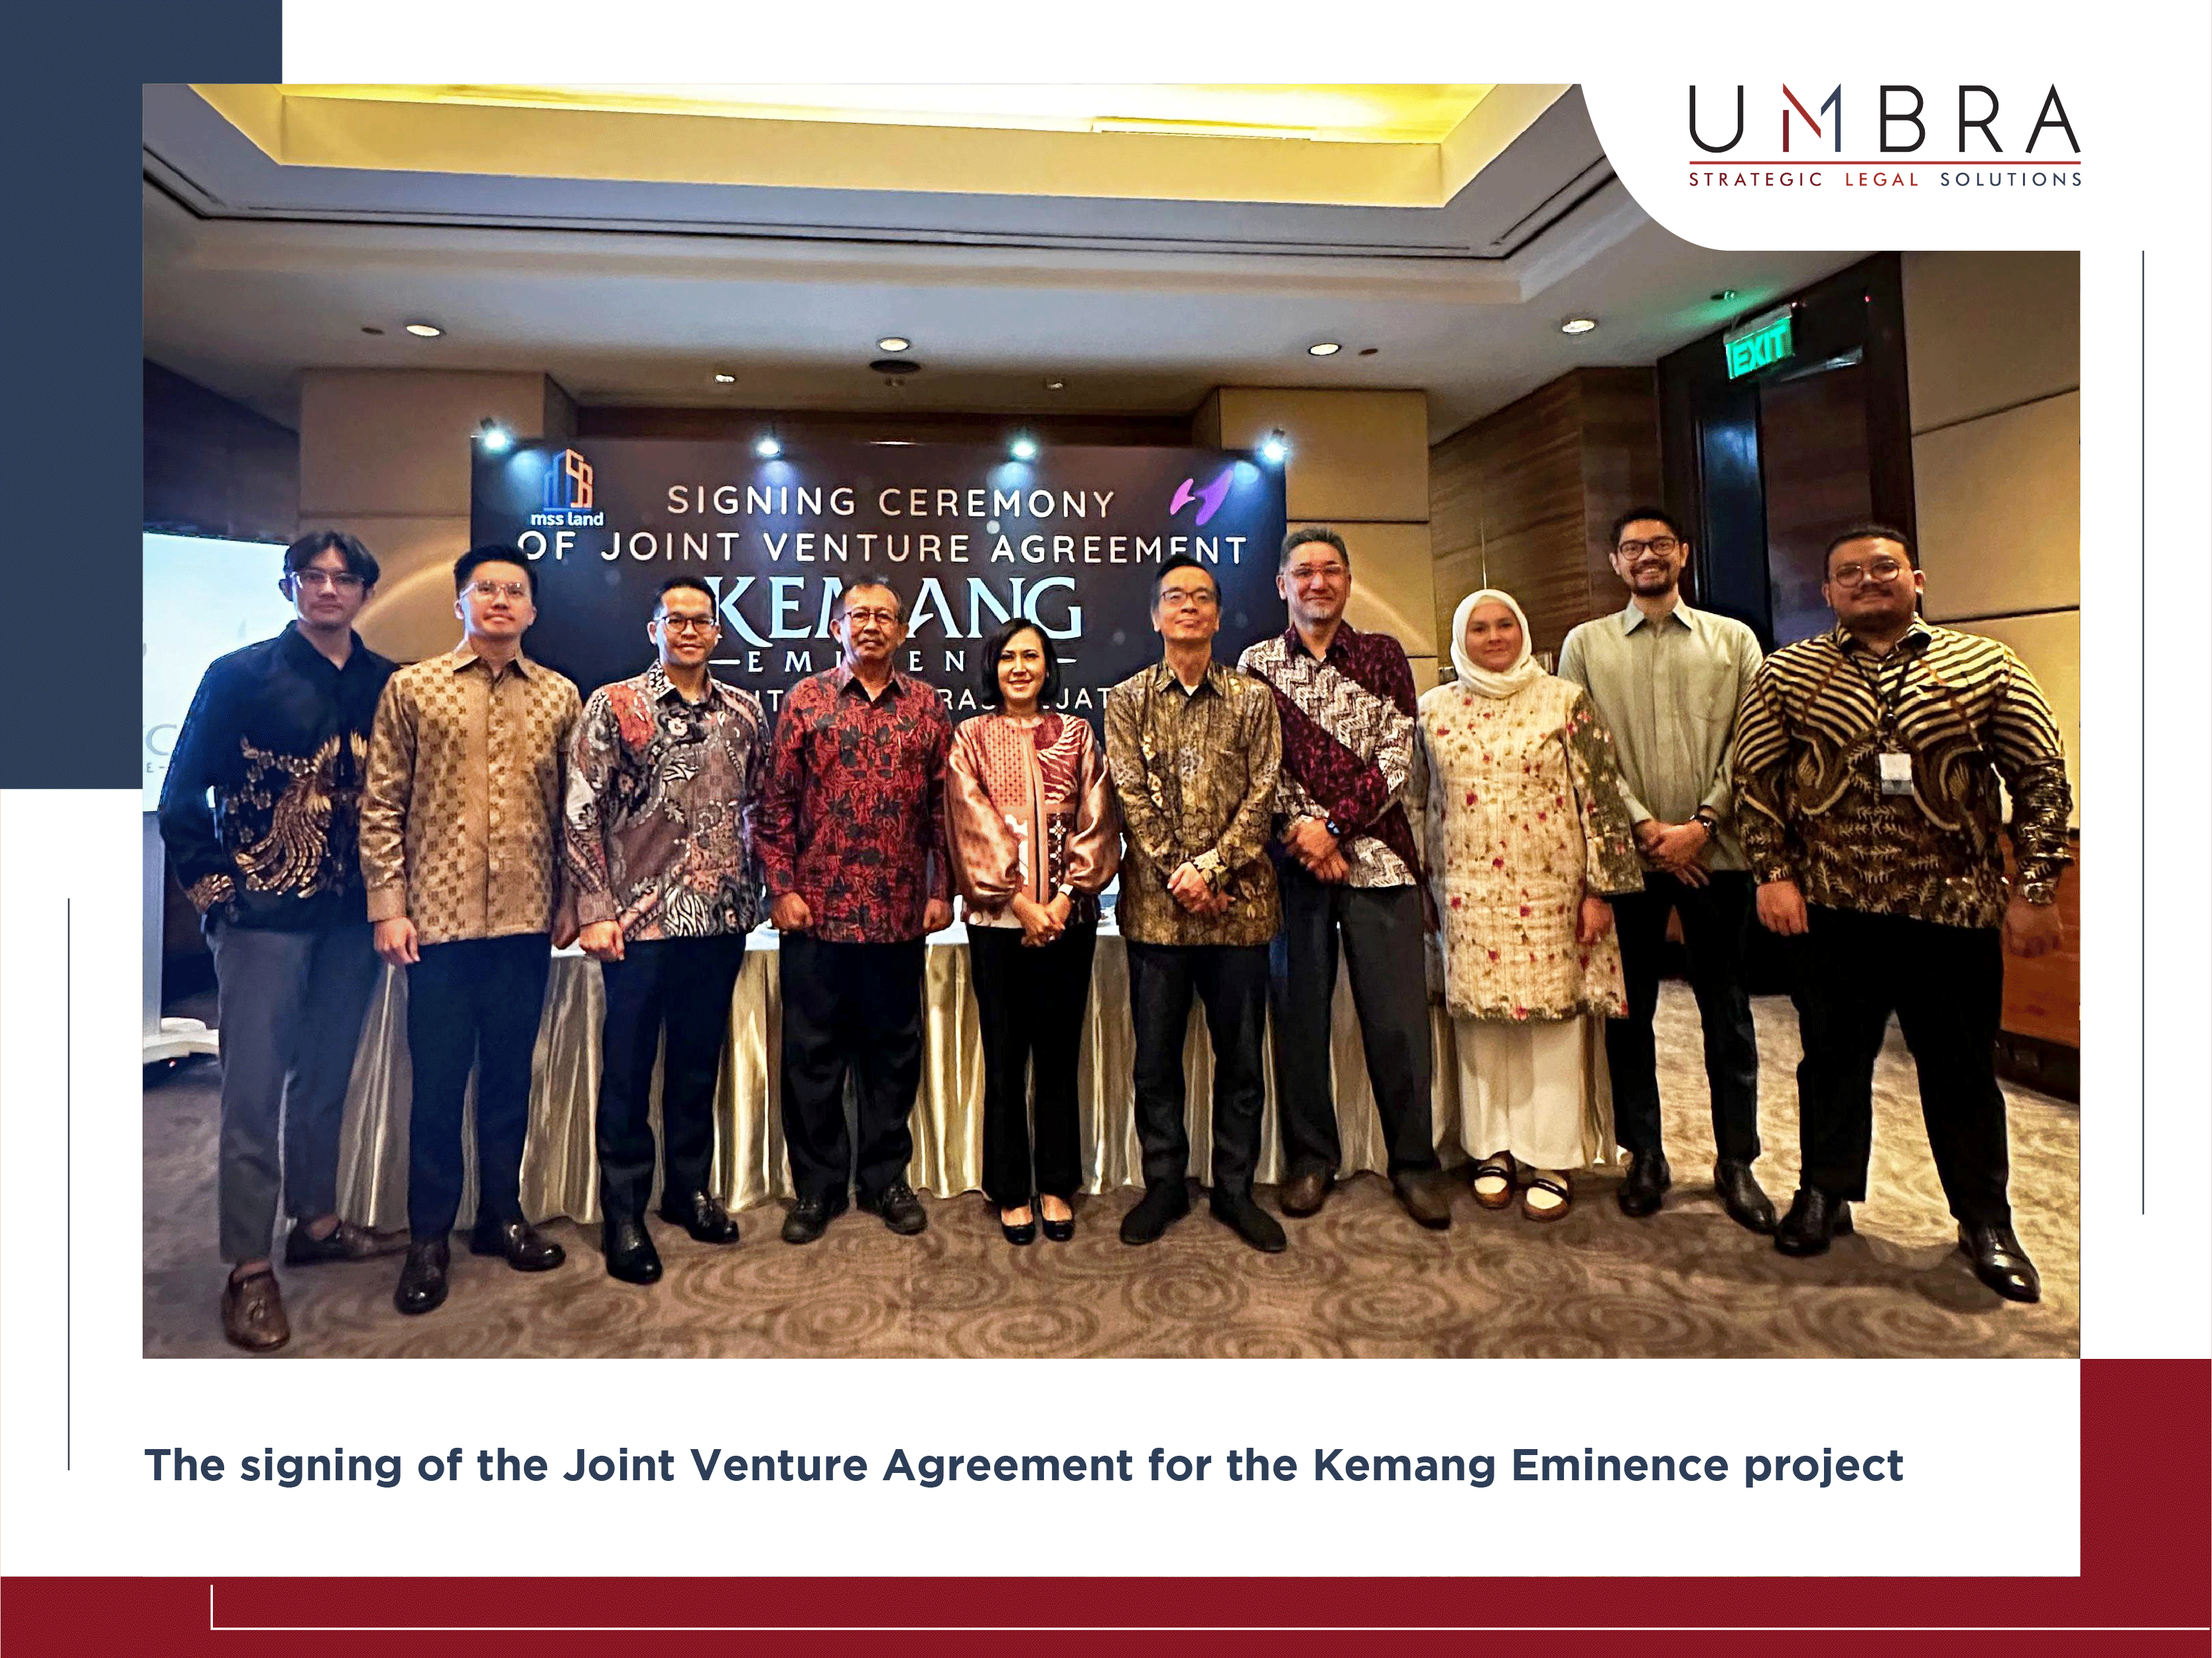 The signing of the Joint Venture Agreement for the Kemang Eminence project